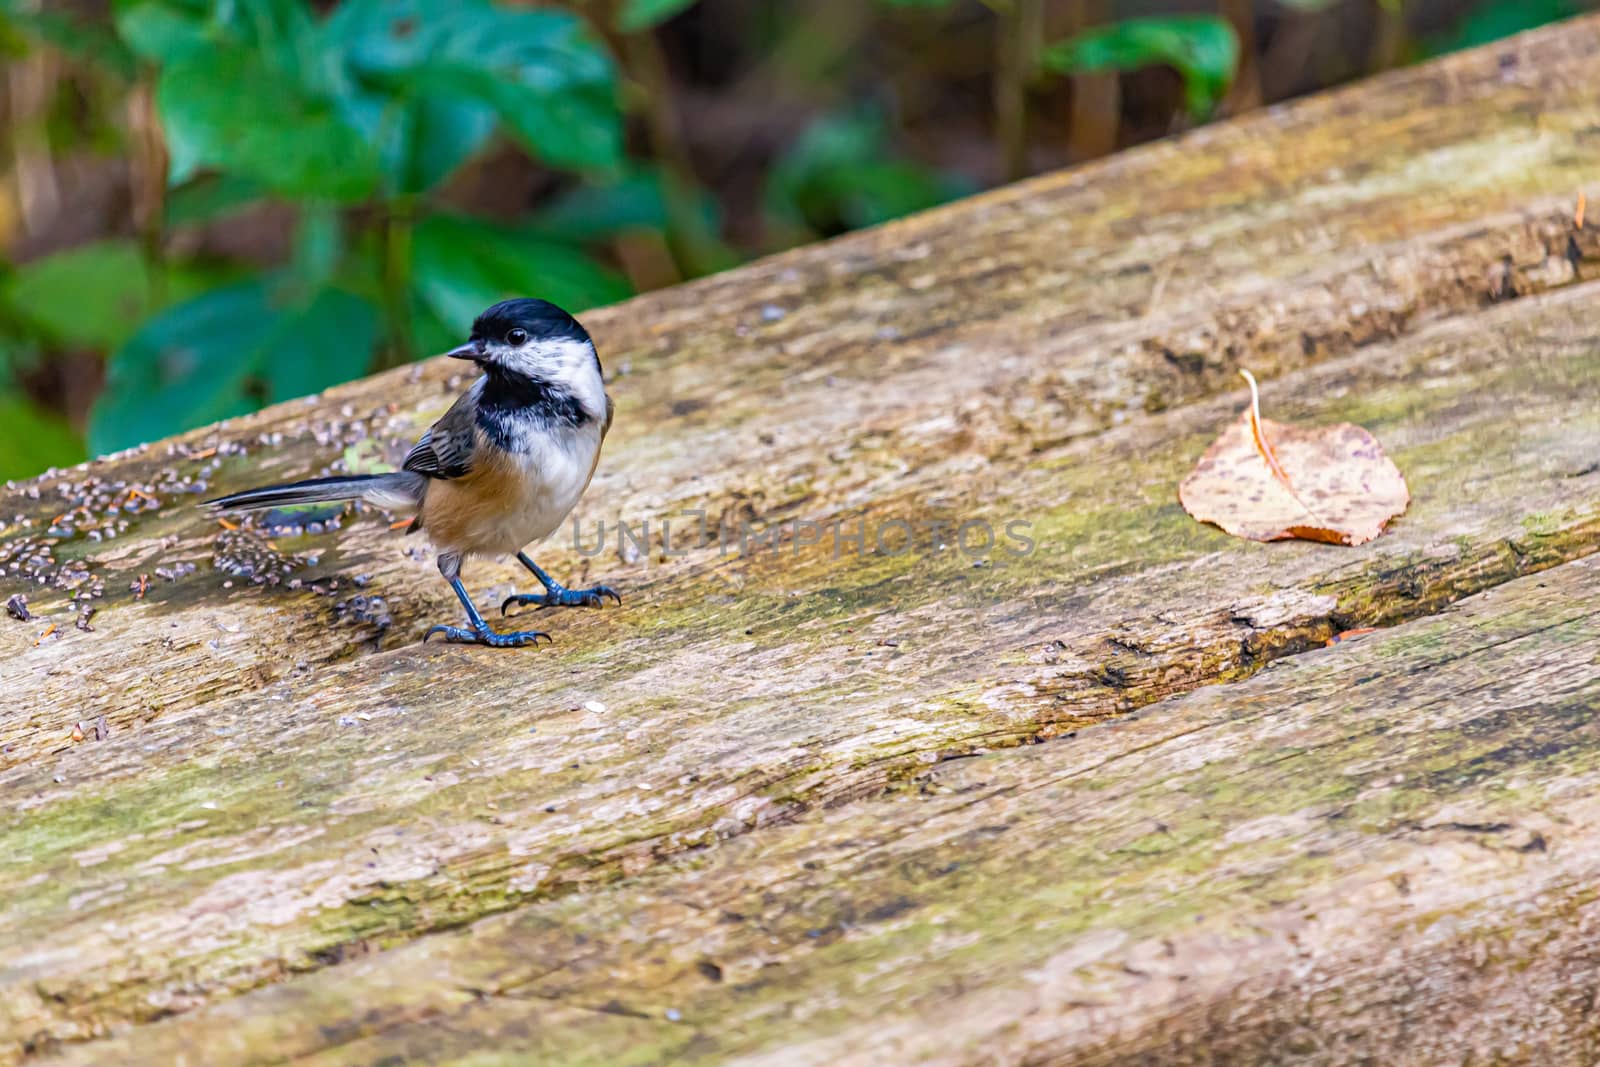 A black-capped chickadee is standing on a wooden bench. The small bird's head turned to the left, back against its body.